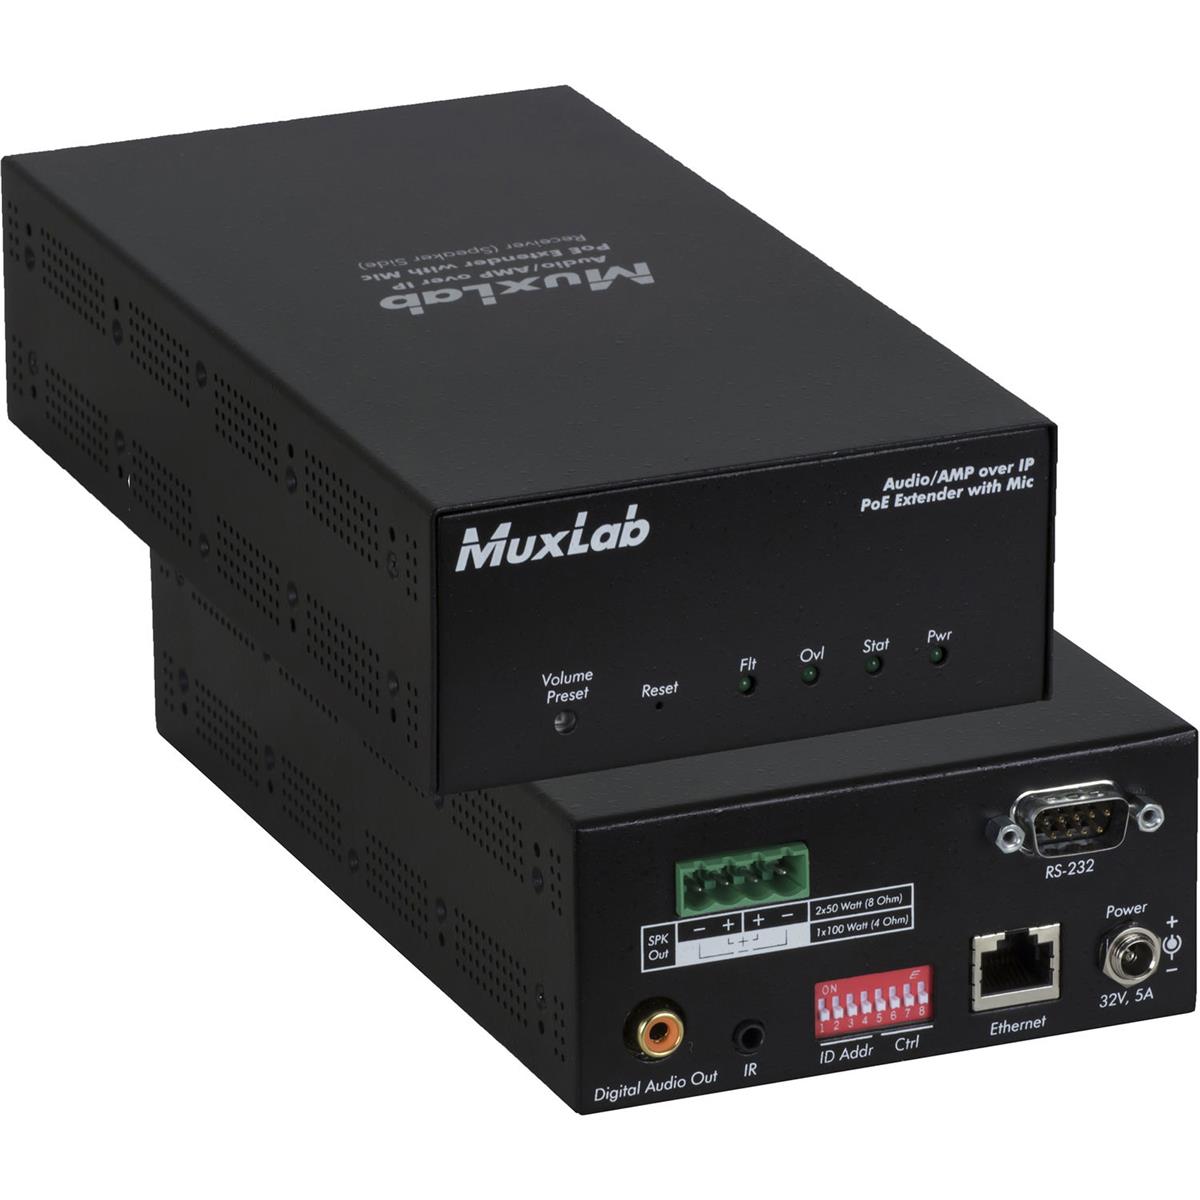 Image of Muxlab MuxLab Audio/AMP Over IP Receiver with Amplifier 50W/CH